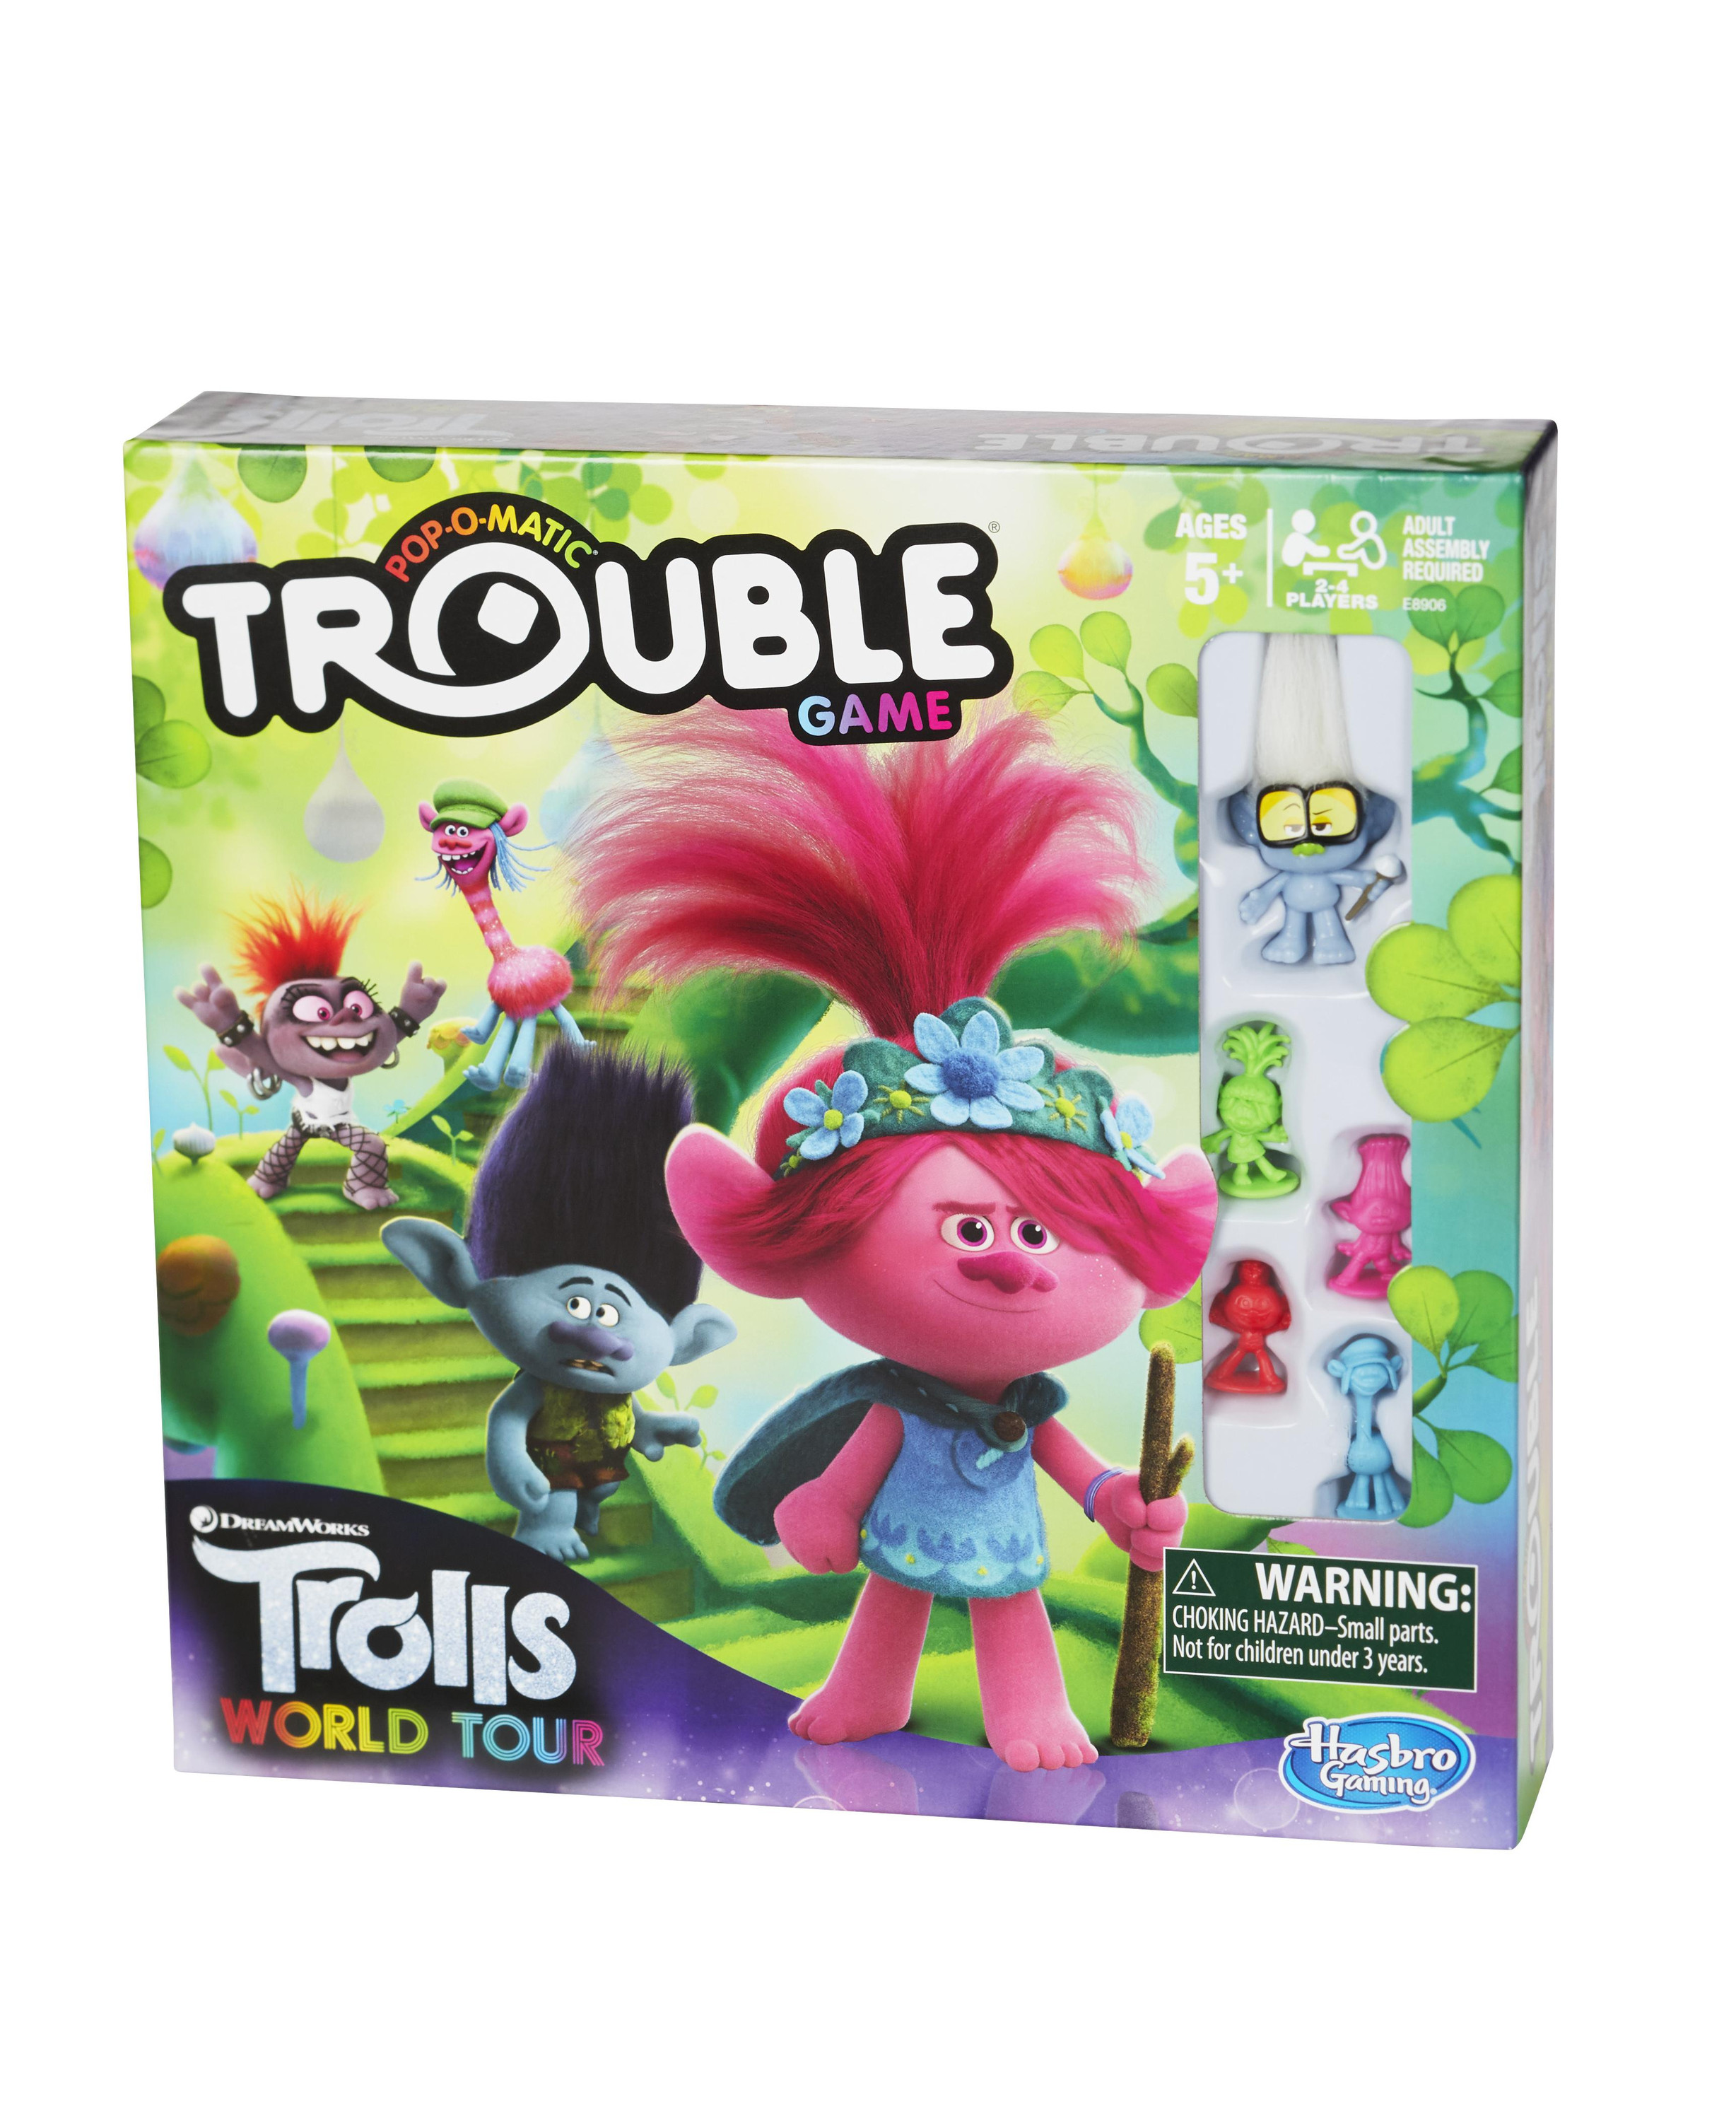 Crayola Trolls World Tour Paint Set, Trolls 2, Holiday Gift for Kids, Ages  3, 4, 5, 6 